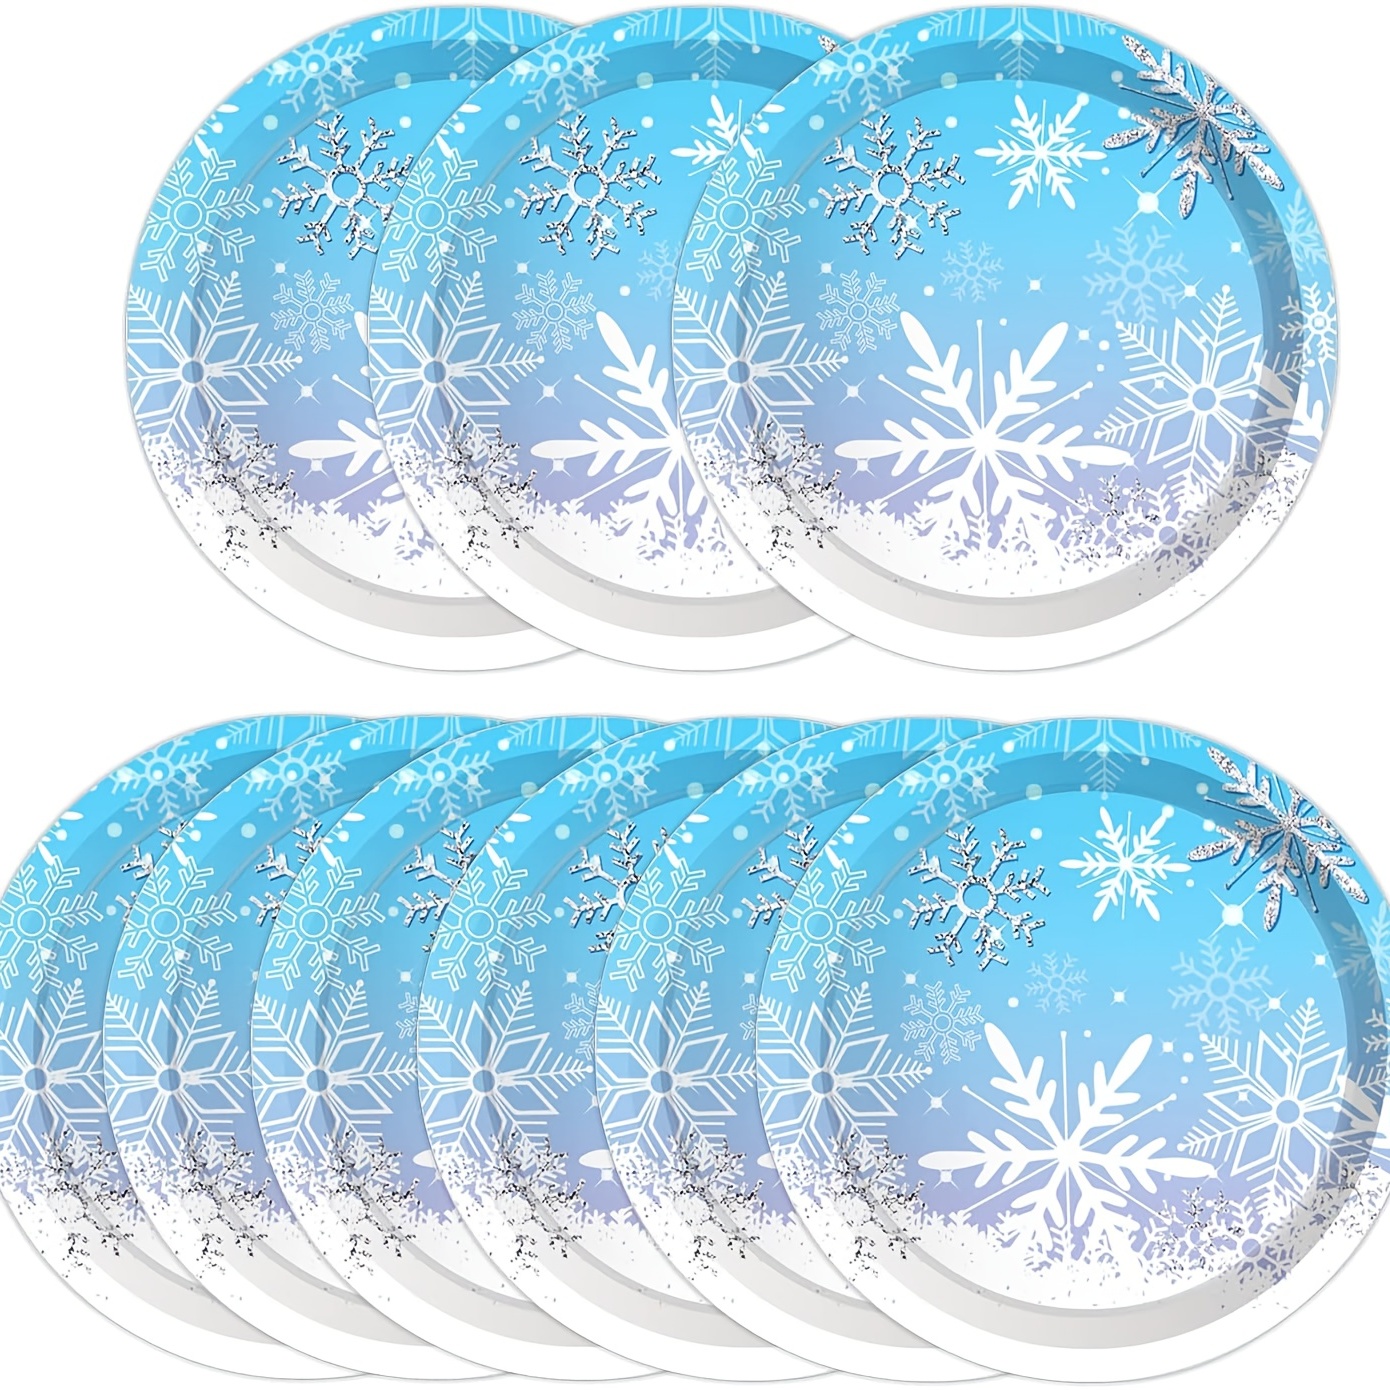 Winter Party Decorations  Snowflake Party Decorations  Christmas Party Decorations Include Blue Snow Party Plate  Dessert Plates  cups  Napkins (16 - 2